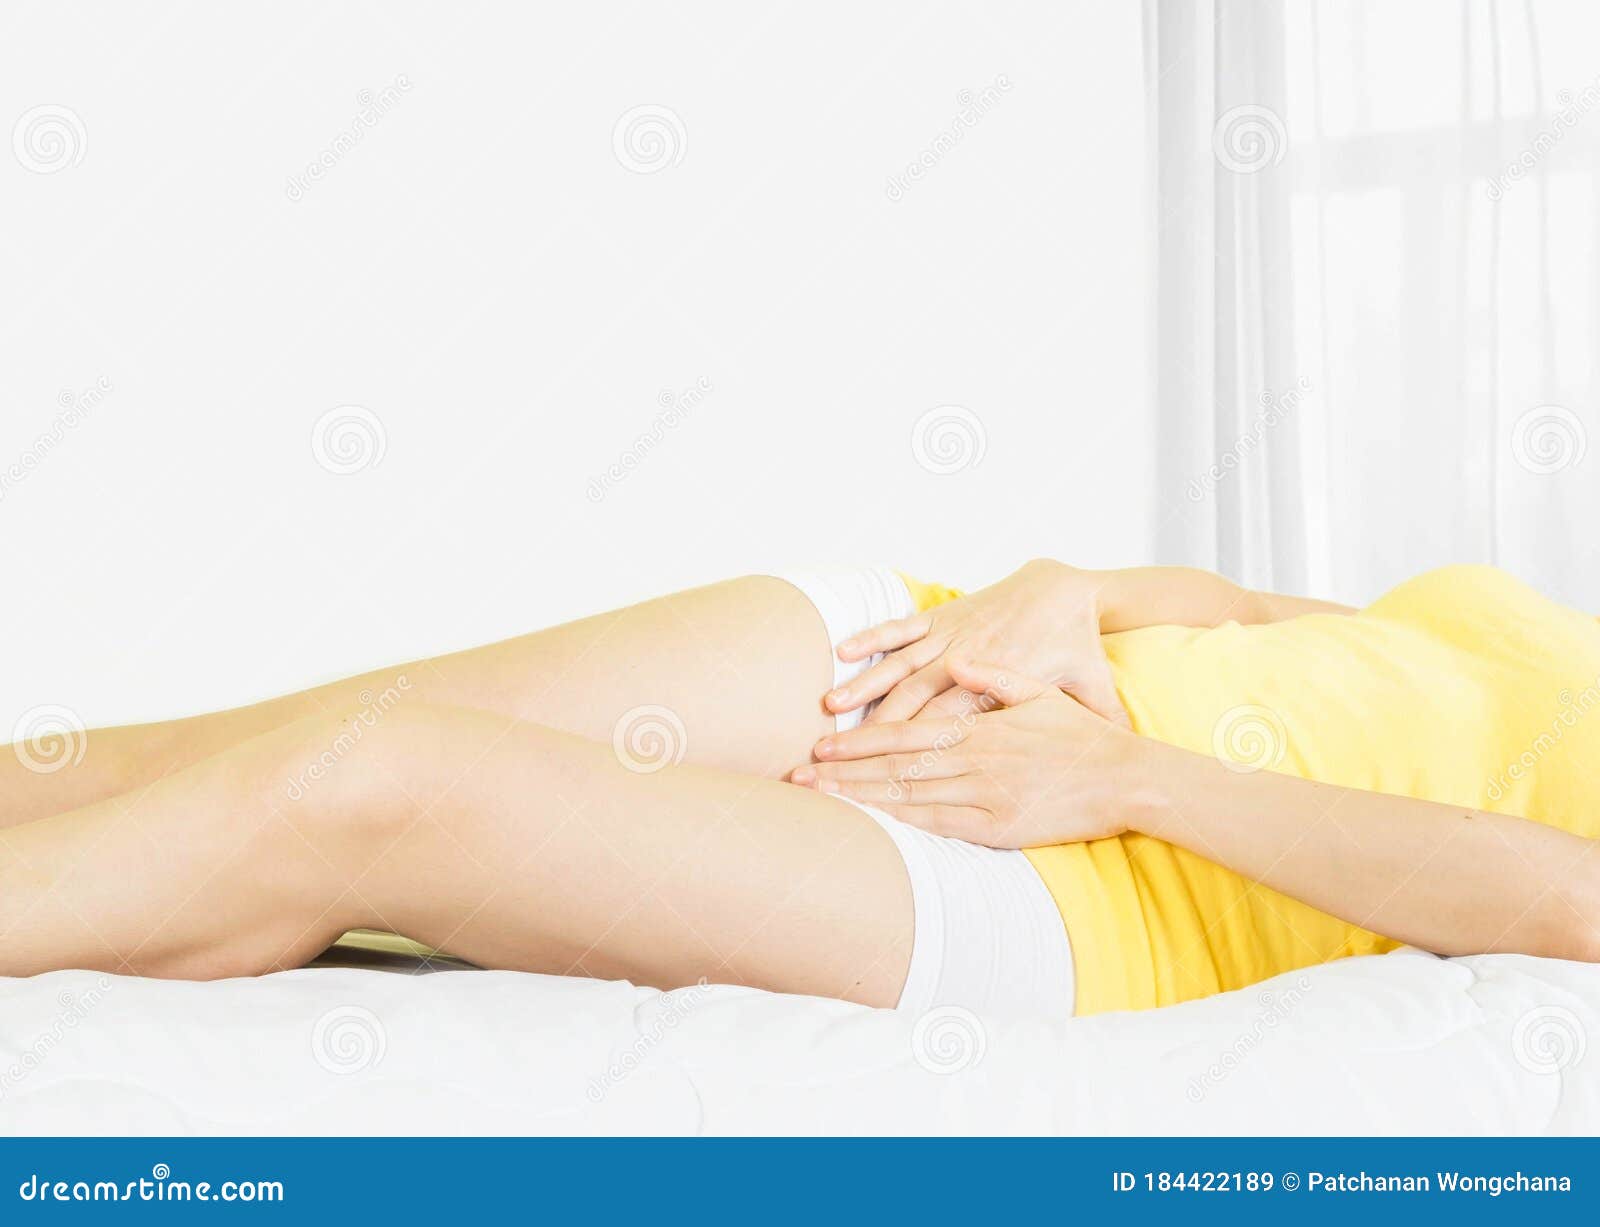 Young Asian Woman Wearing Yellow Undershirt Sitting on a White Bed by the  Window with a Thin Curtain Female Holding Hand To Crotch Stock Image -  Image of illness, ache: 184422189